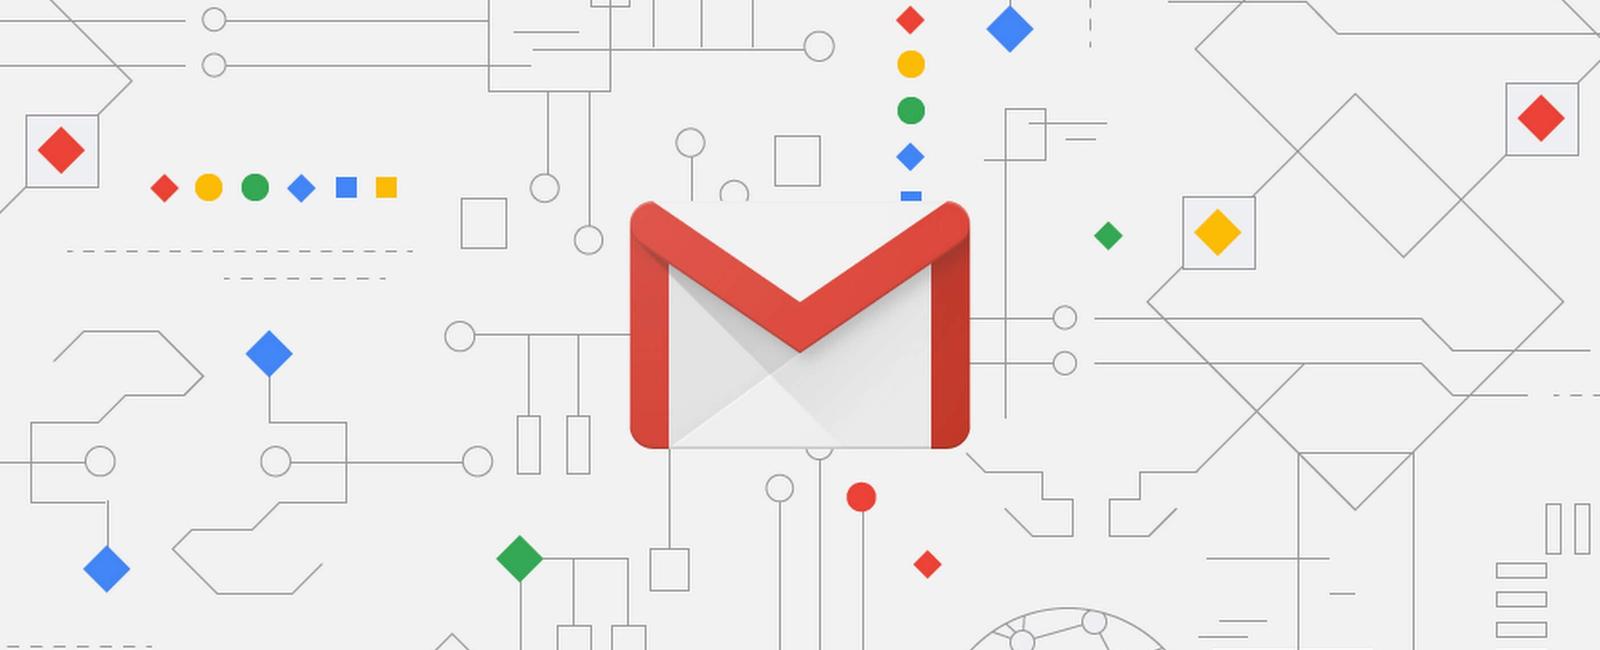 Google Calendar scam adds malicious links to your schedule